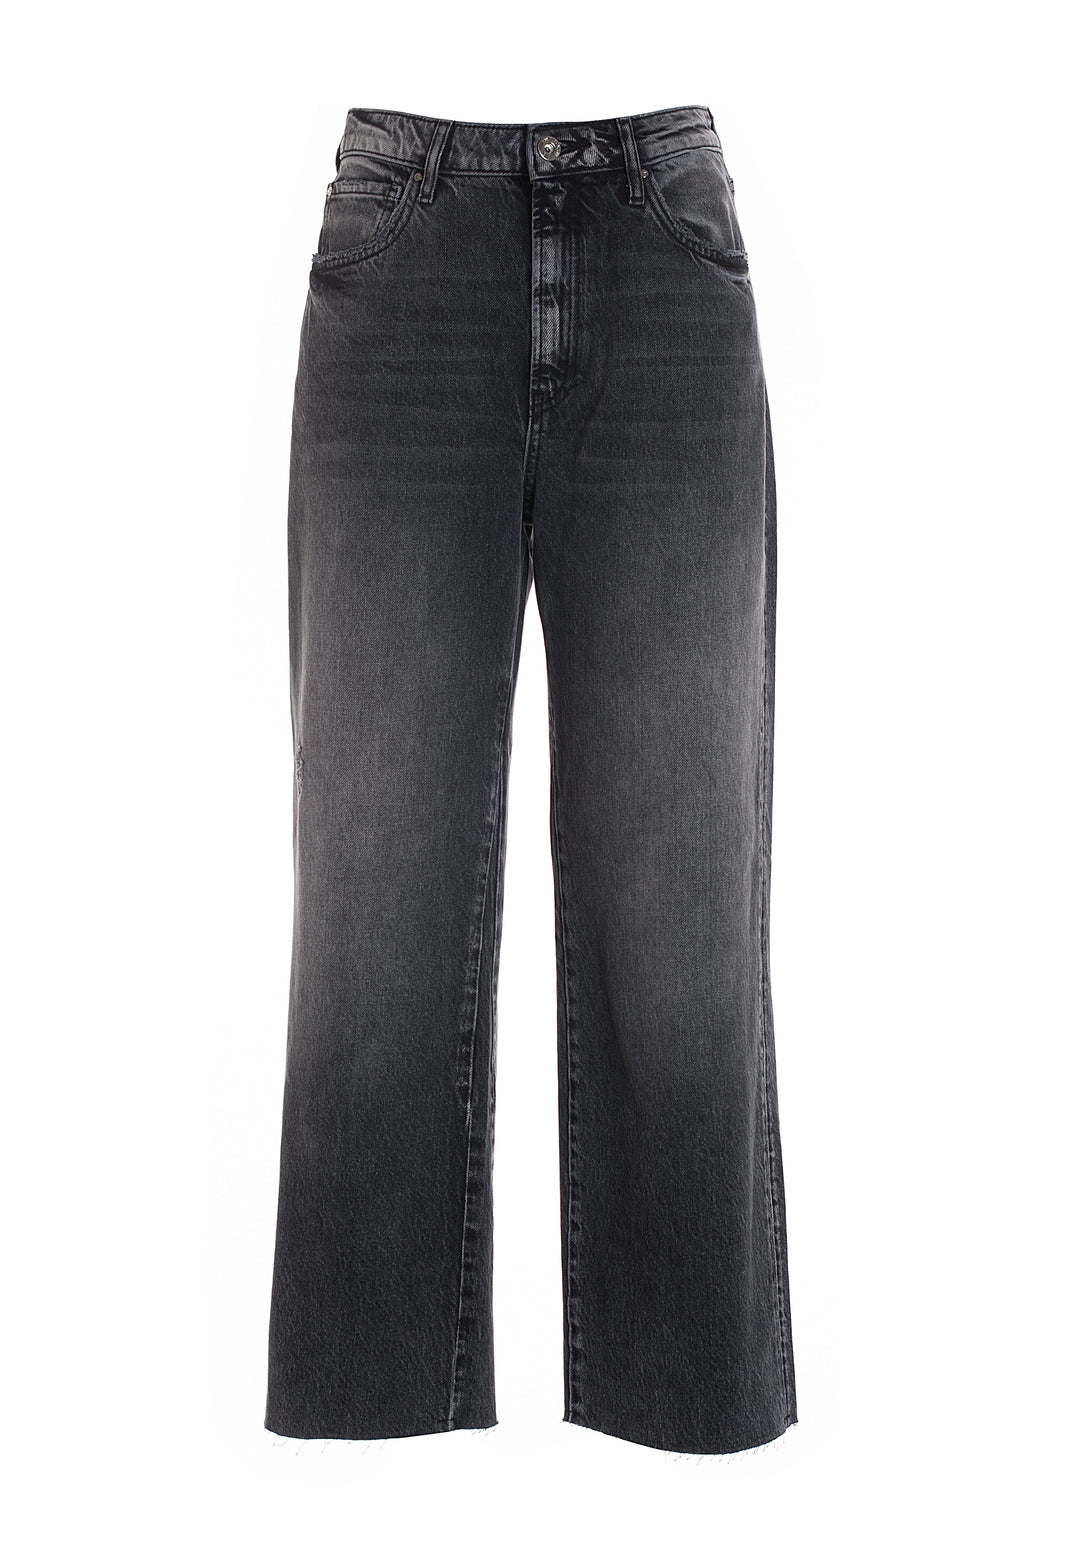 Jeans wide leg cropped made in black denim with middle wash